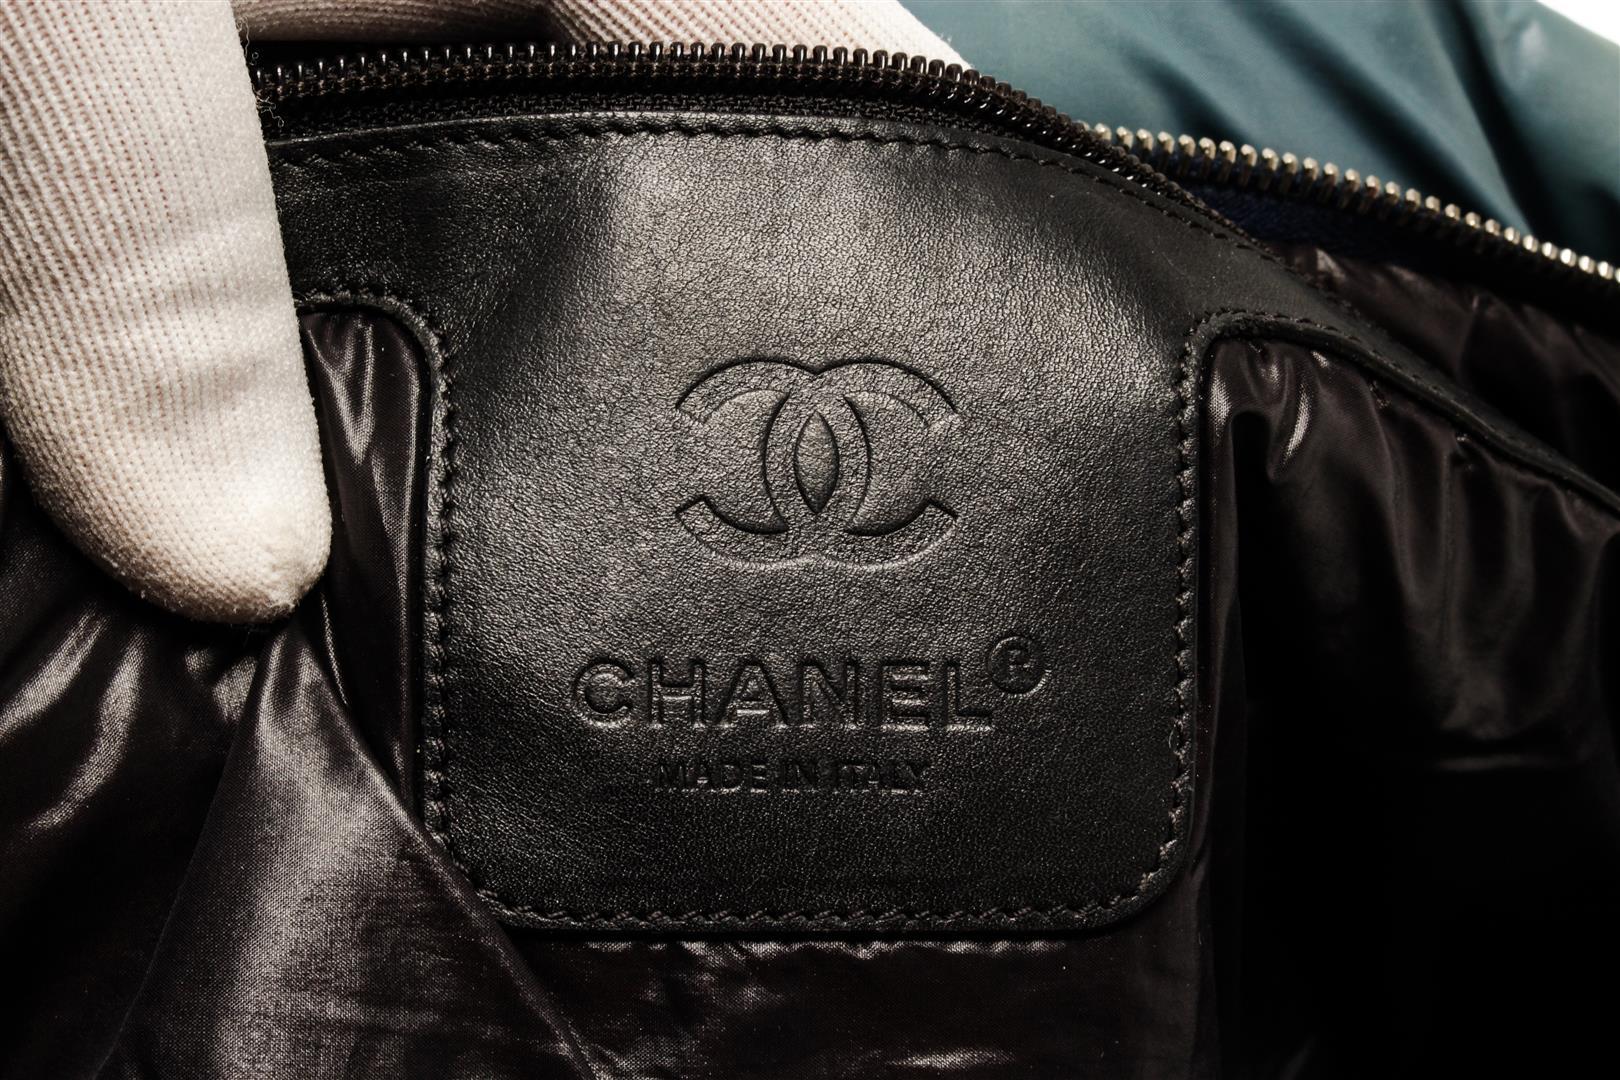 Chanel Blue Quilted Nylon Cocoon Front Zipped Tote Bag